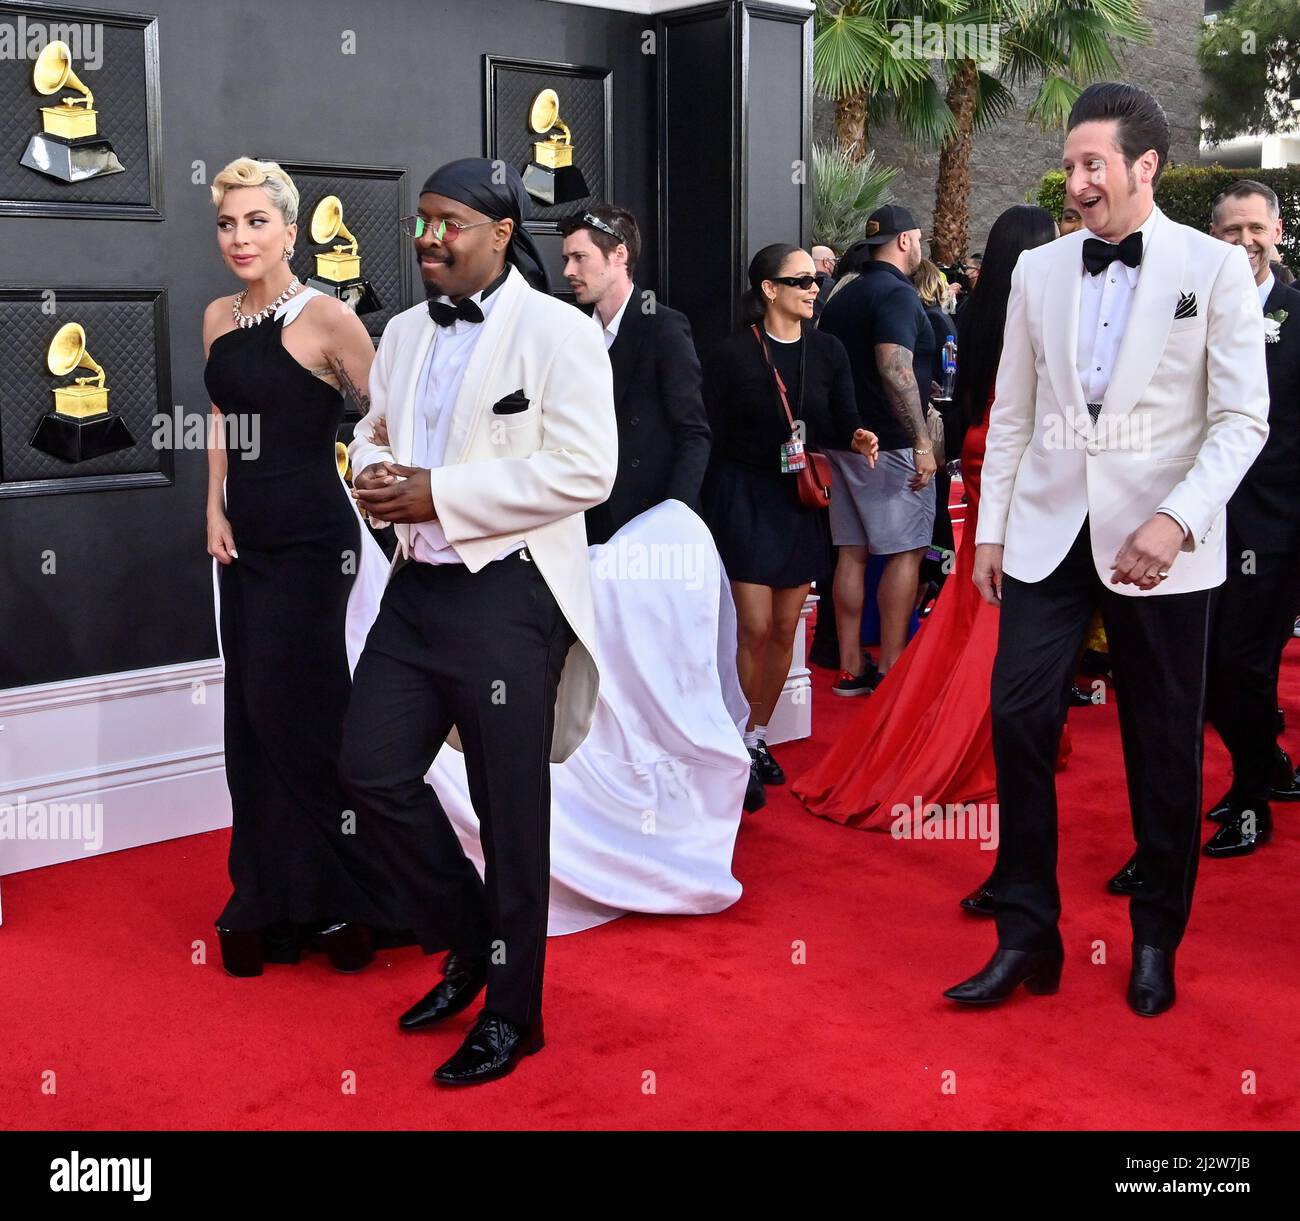 The 64th annual Grammy awards – in pictures, Music